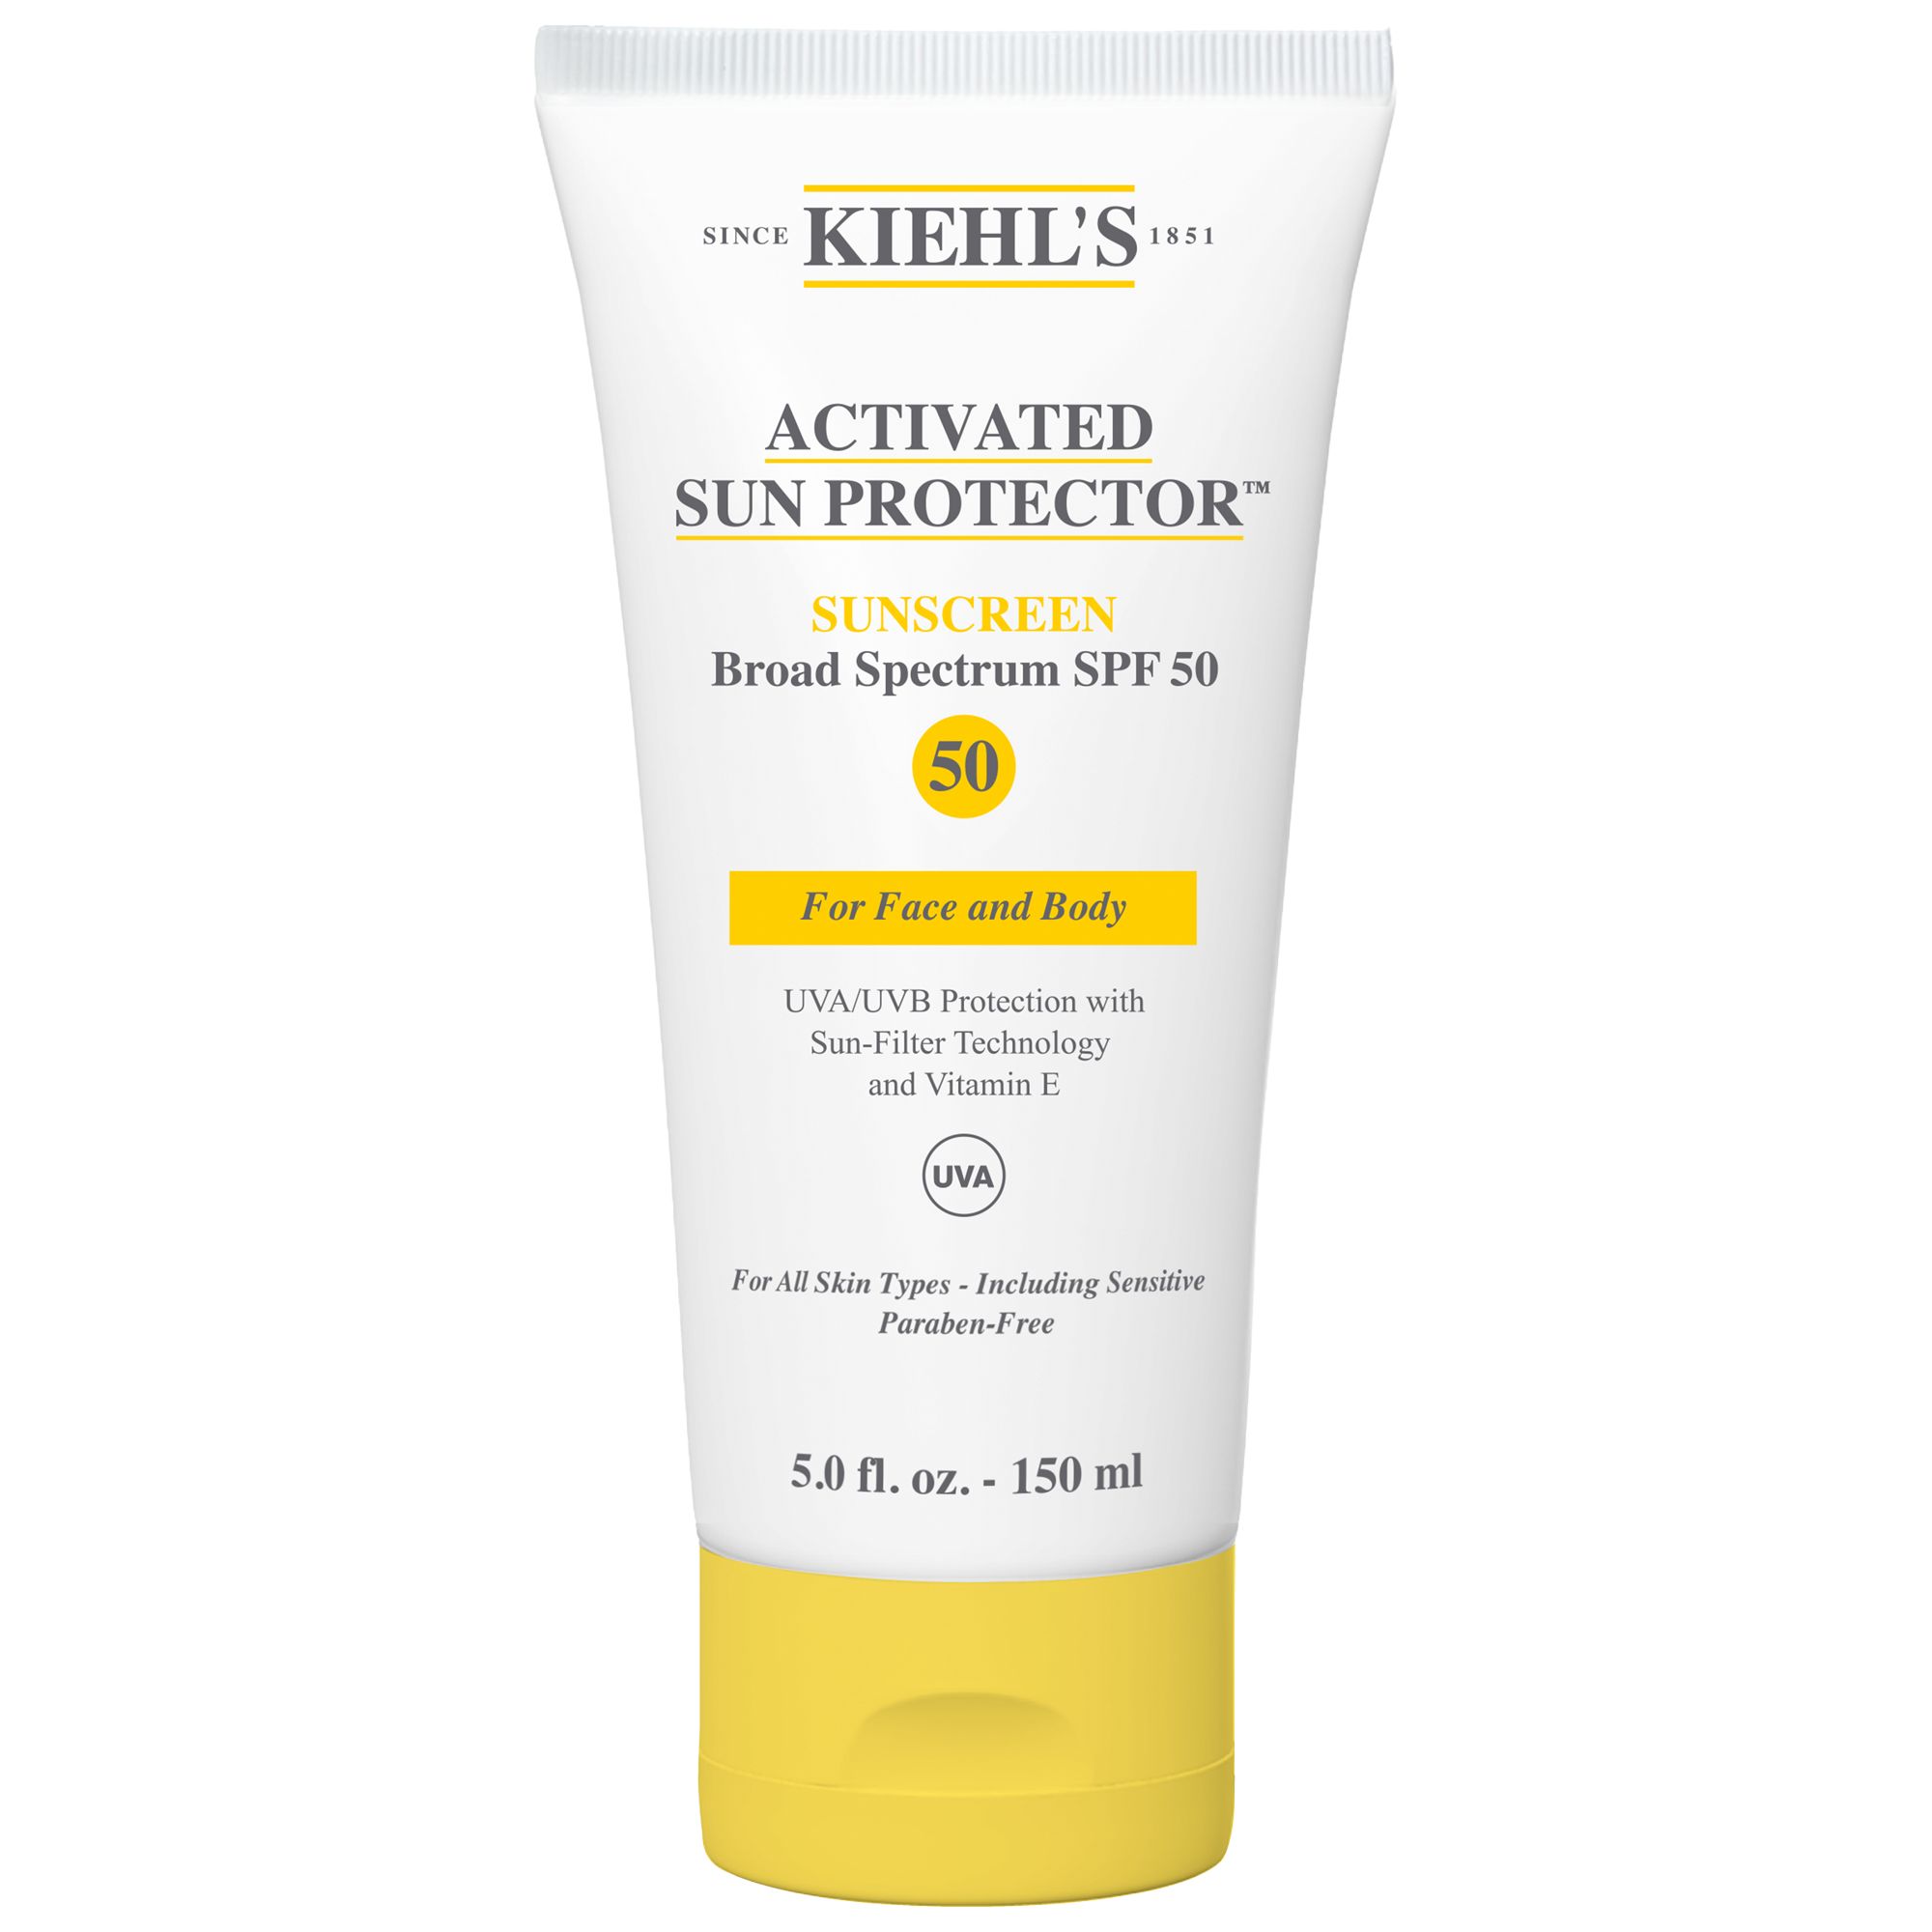 Kiehl's Activated Sun Protector Sunscreen For Face and Body SPF 50, 150ml